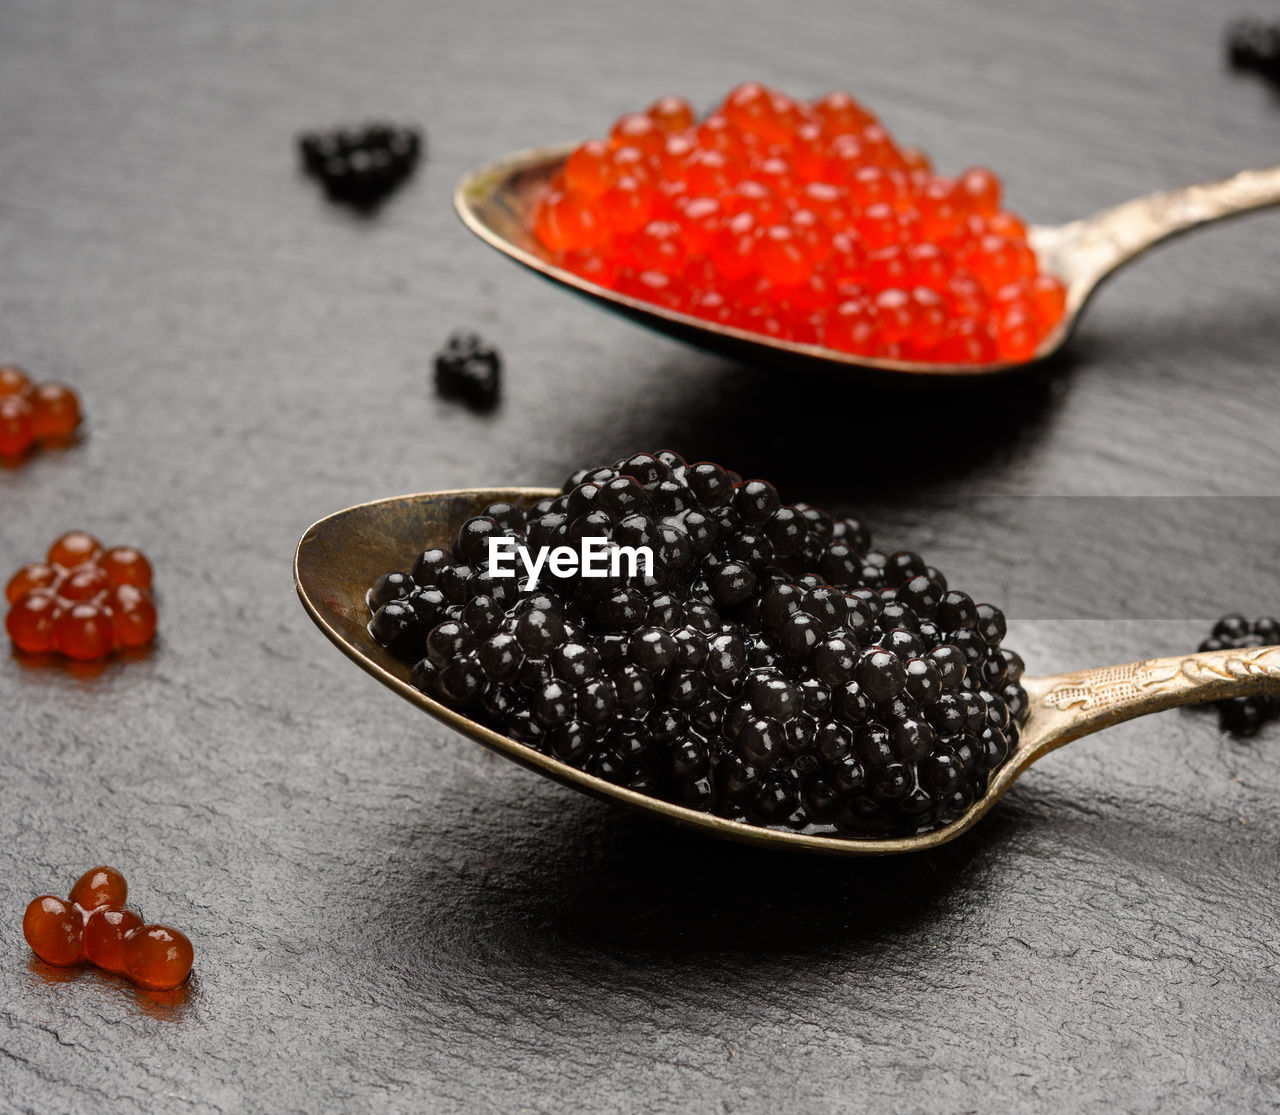 Grainy caviar of paddlefish fish and red chum salmon caviar in a spoon, black background, close up